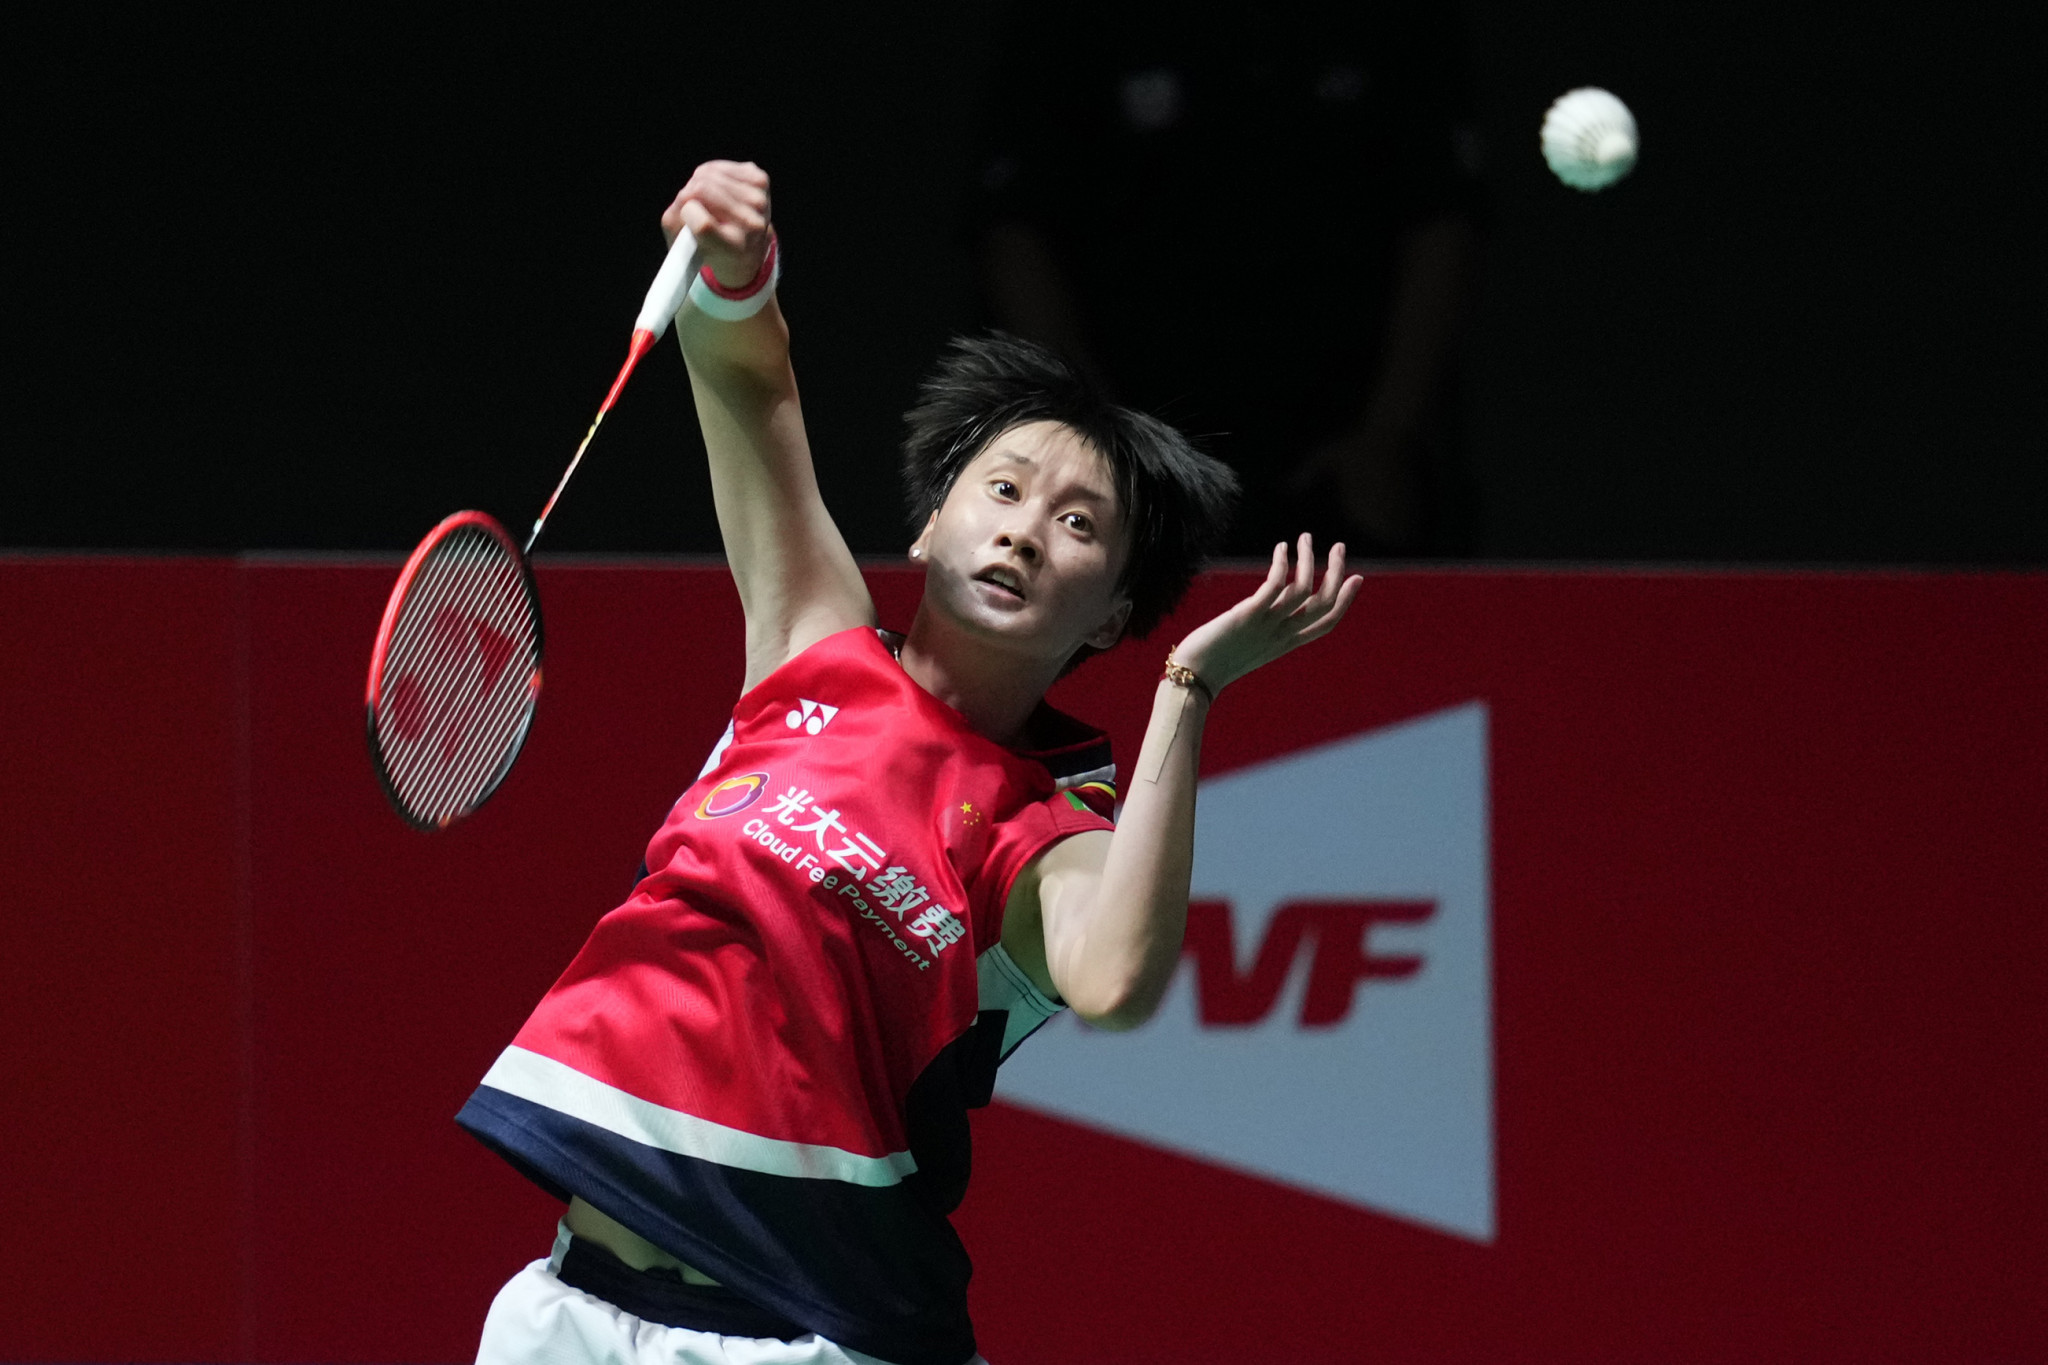 China's Olympic women's singles champion Chen Yufei won four gold medals at the BWF World Junior Championships from 2014 to 2016  ©Getty Images